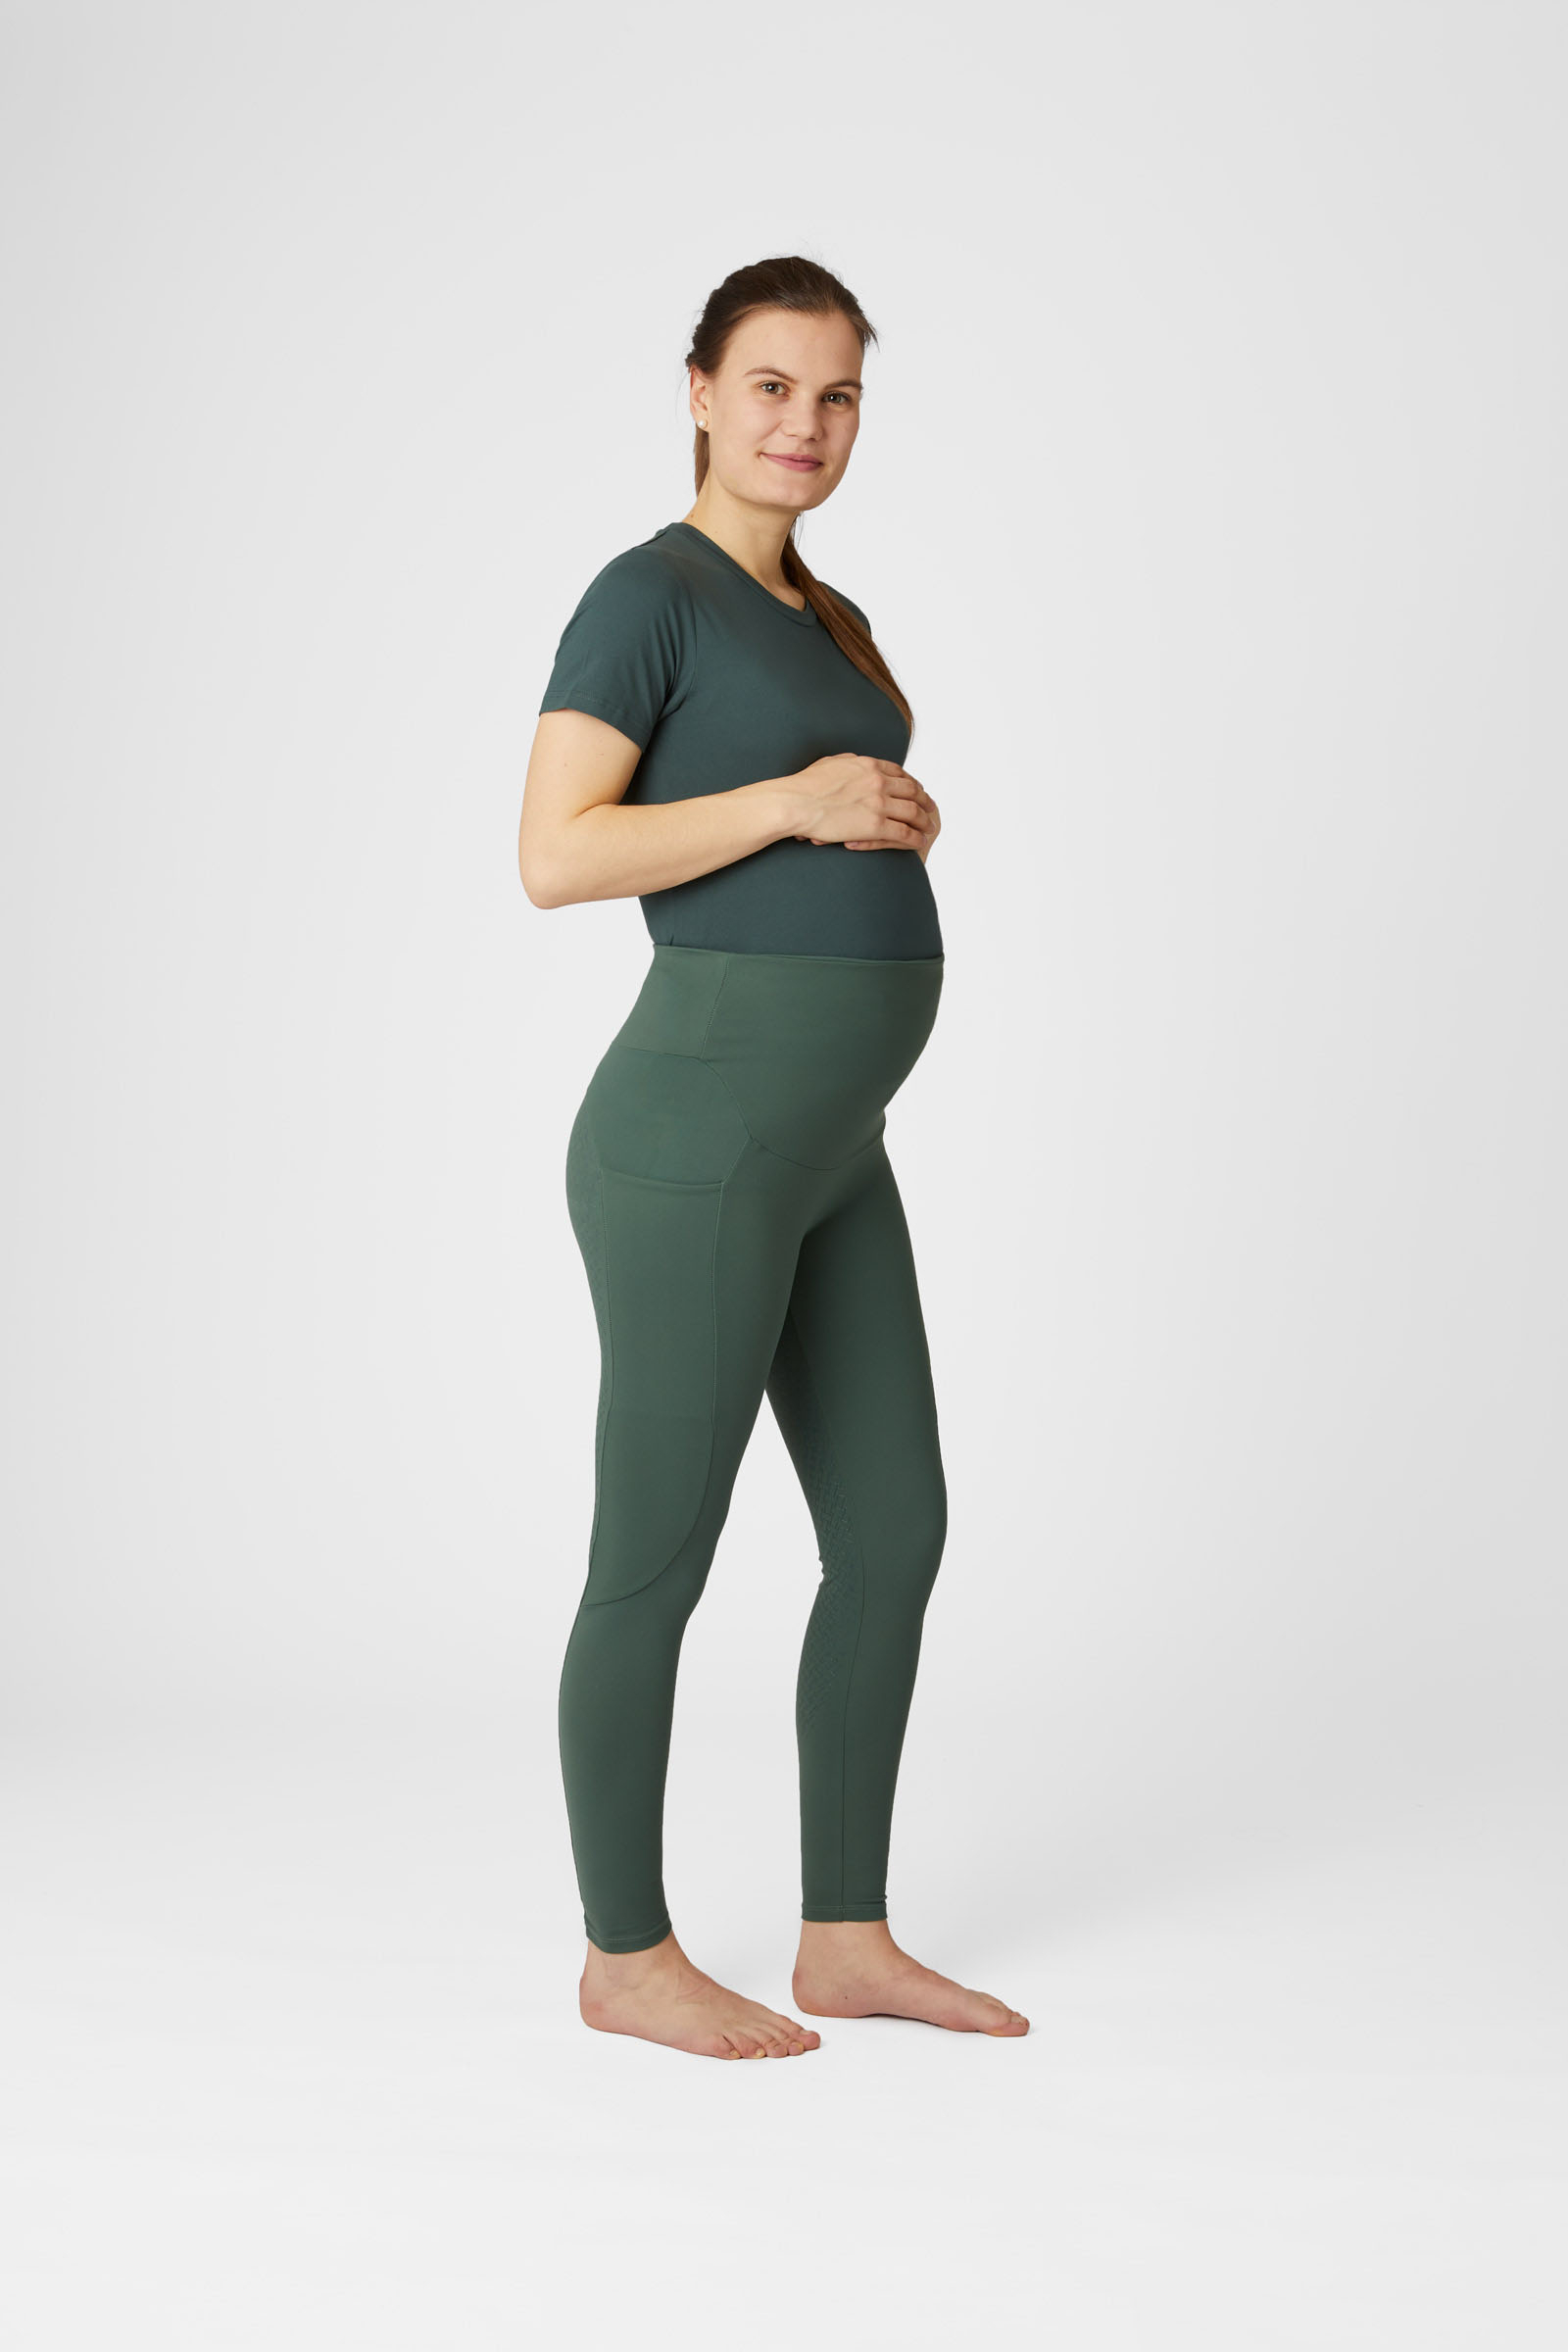 Buy Horze Ginny Maternity Silicone Full Seat Riding Tights with Phone  Pockets